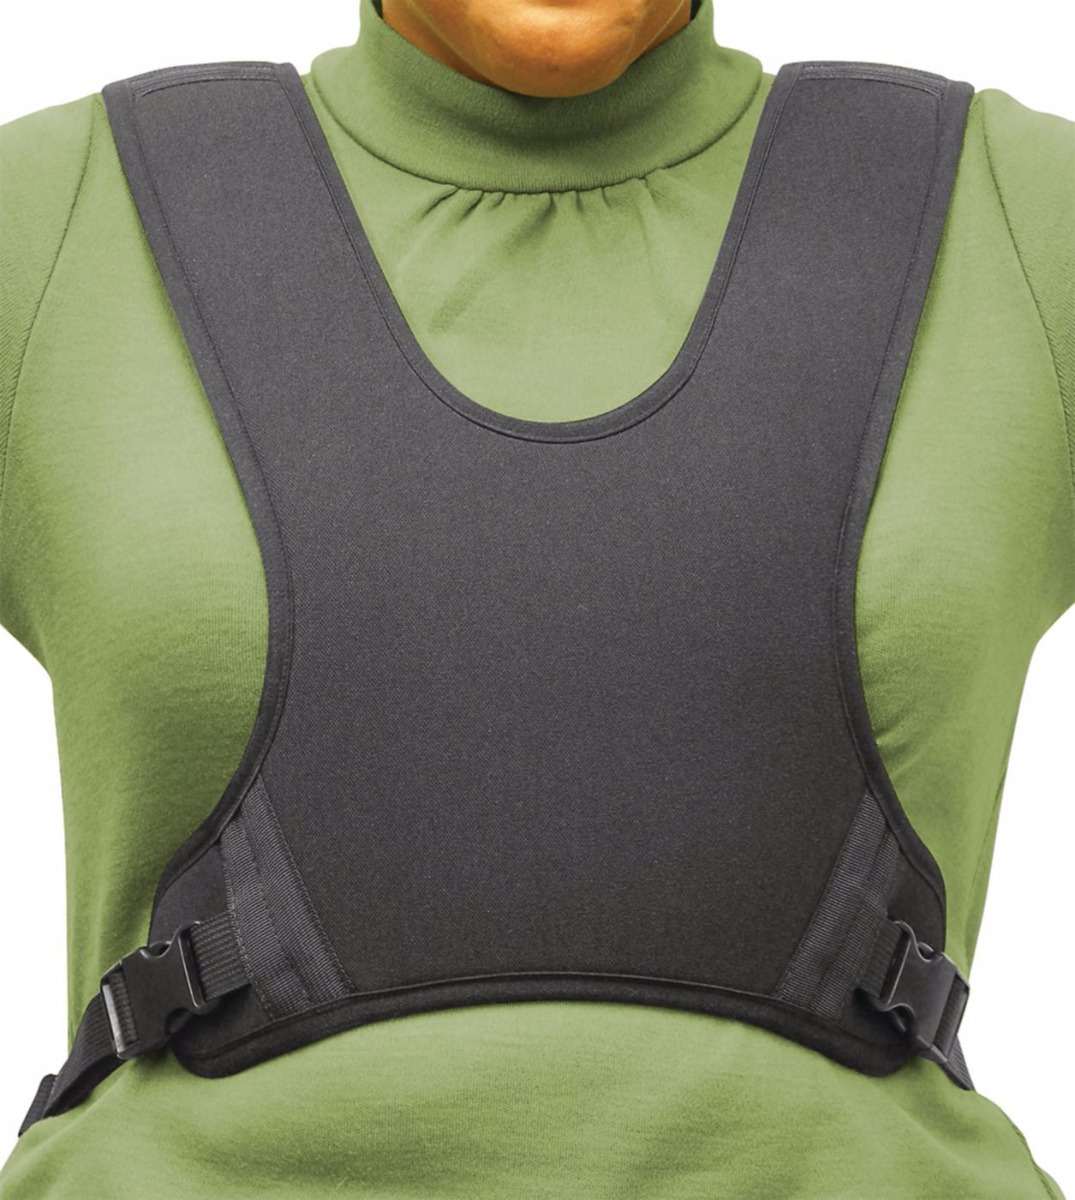 Therafit Vest with Comfort Fit Straps